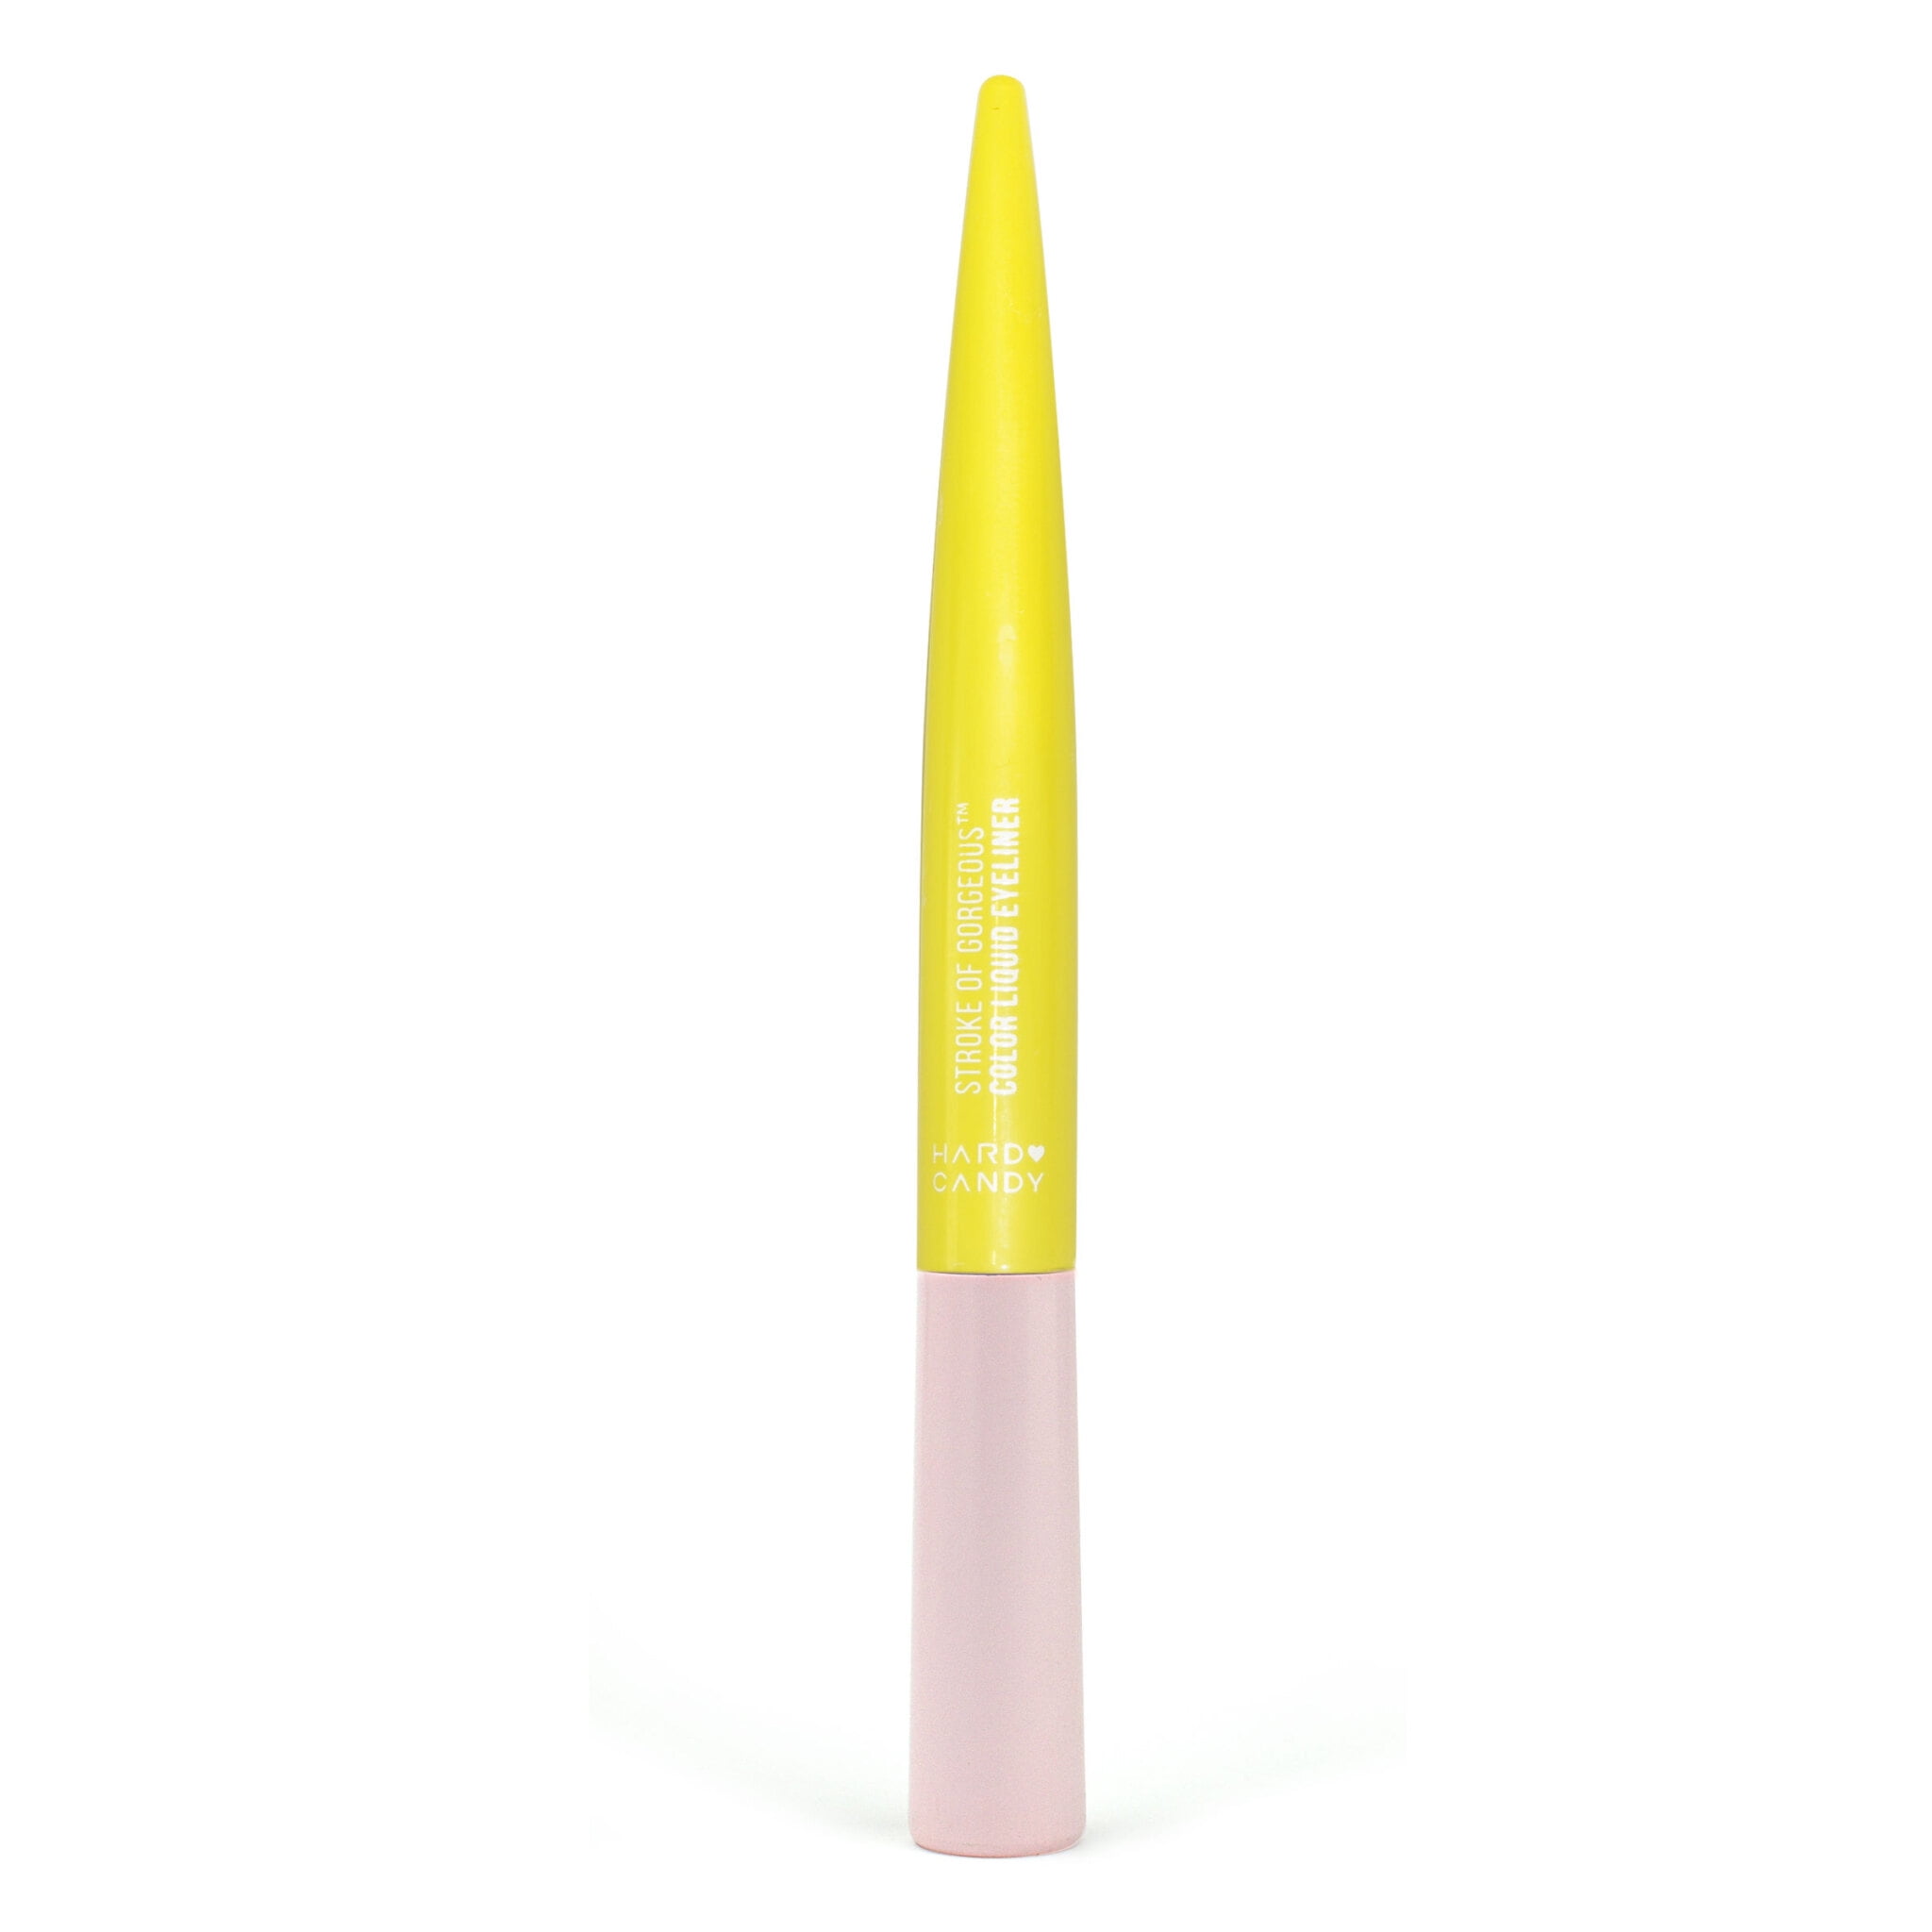 CANDY IS DANDY Color Shifting Cake Eyeliner With Applicator Brush